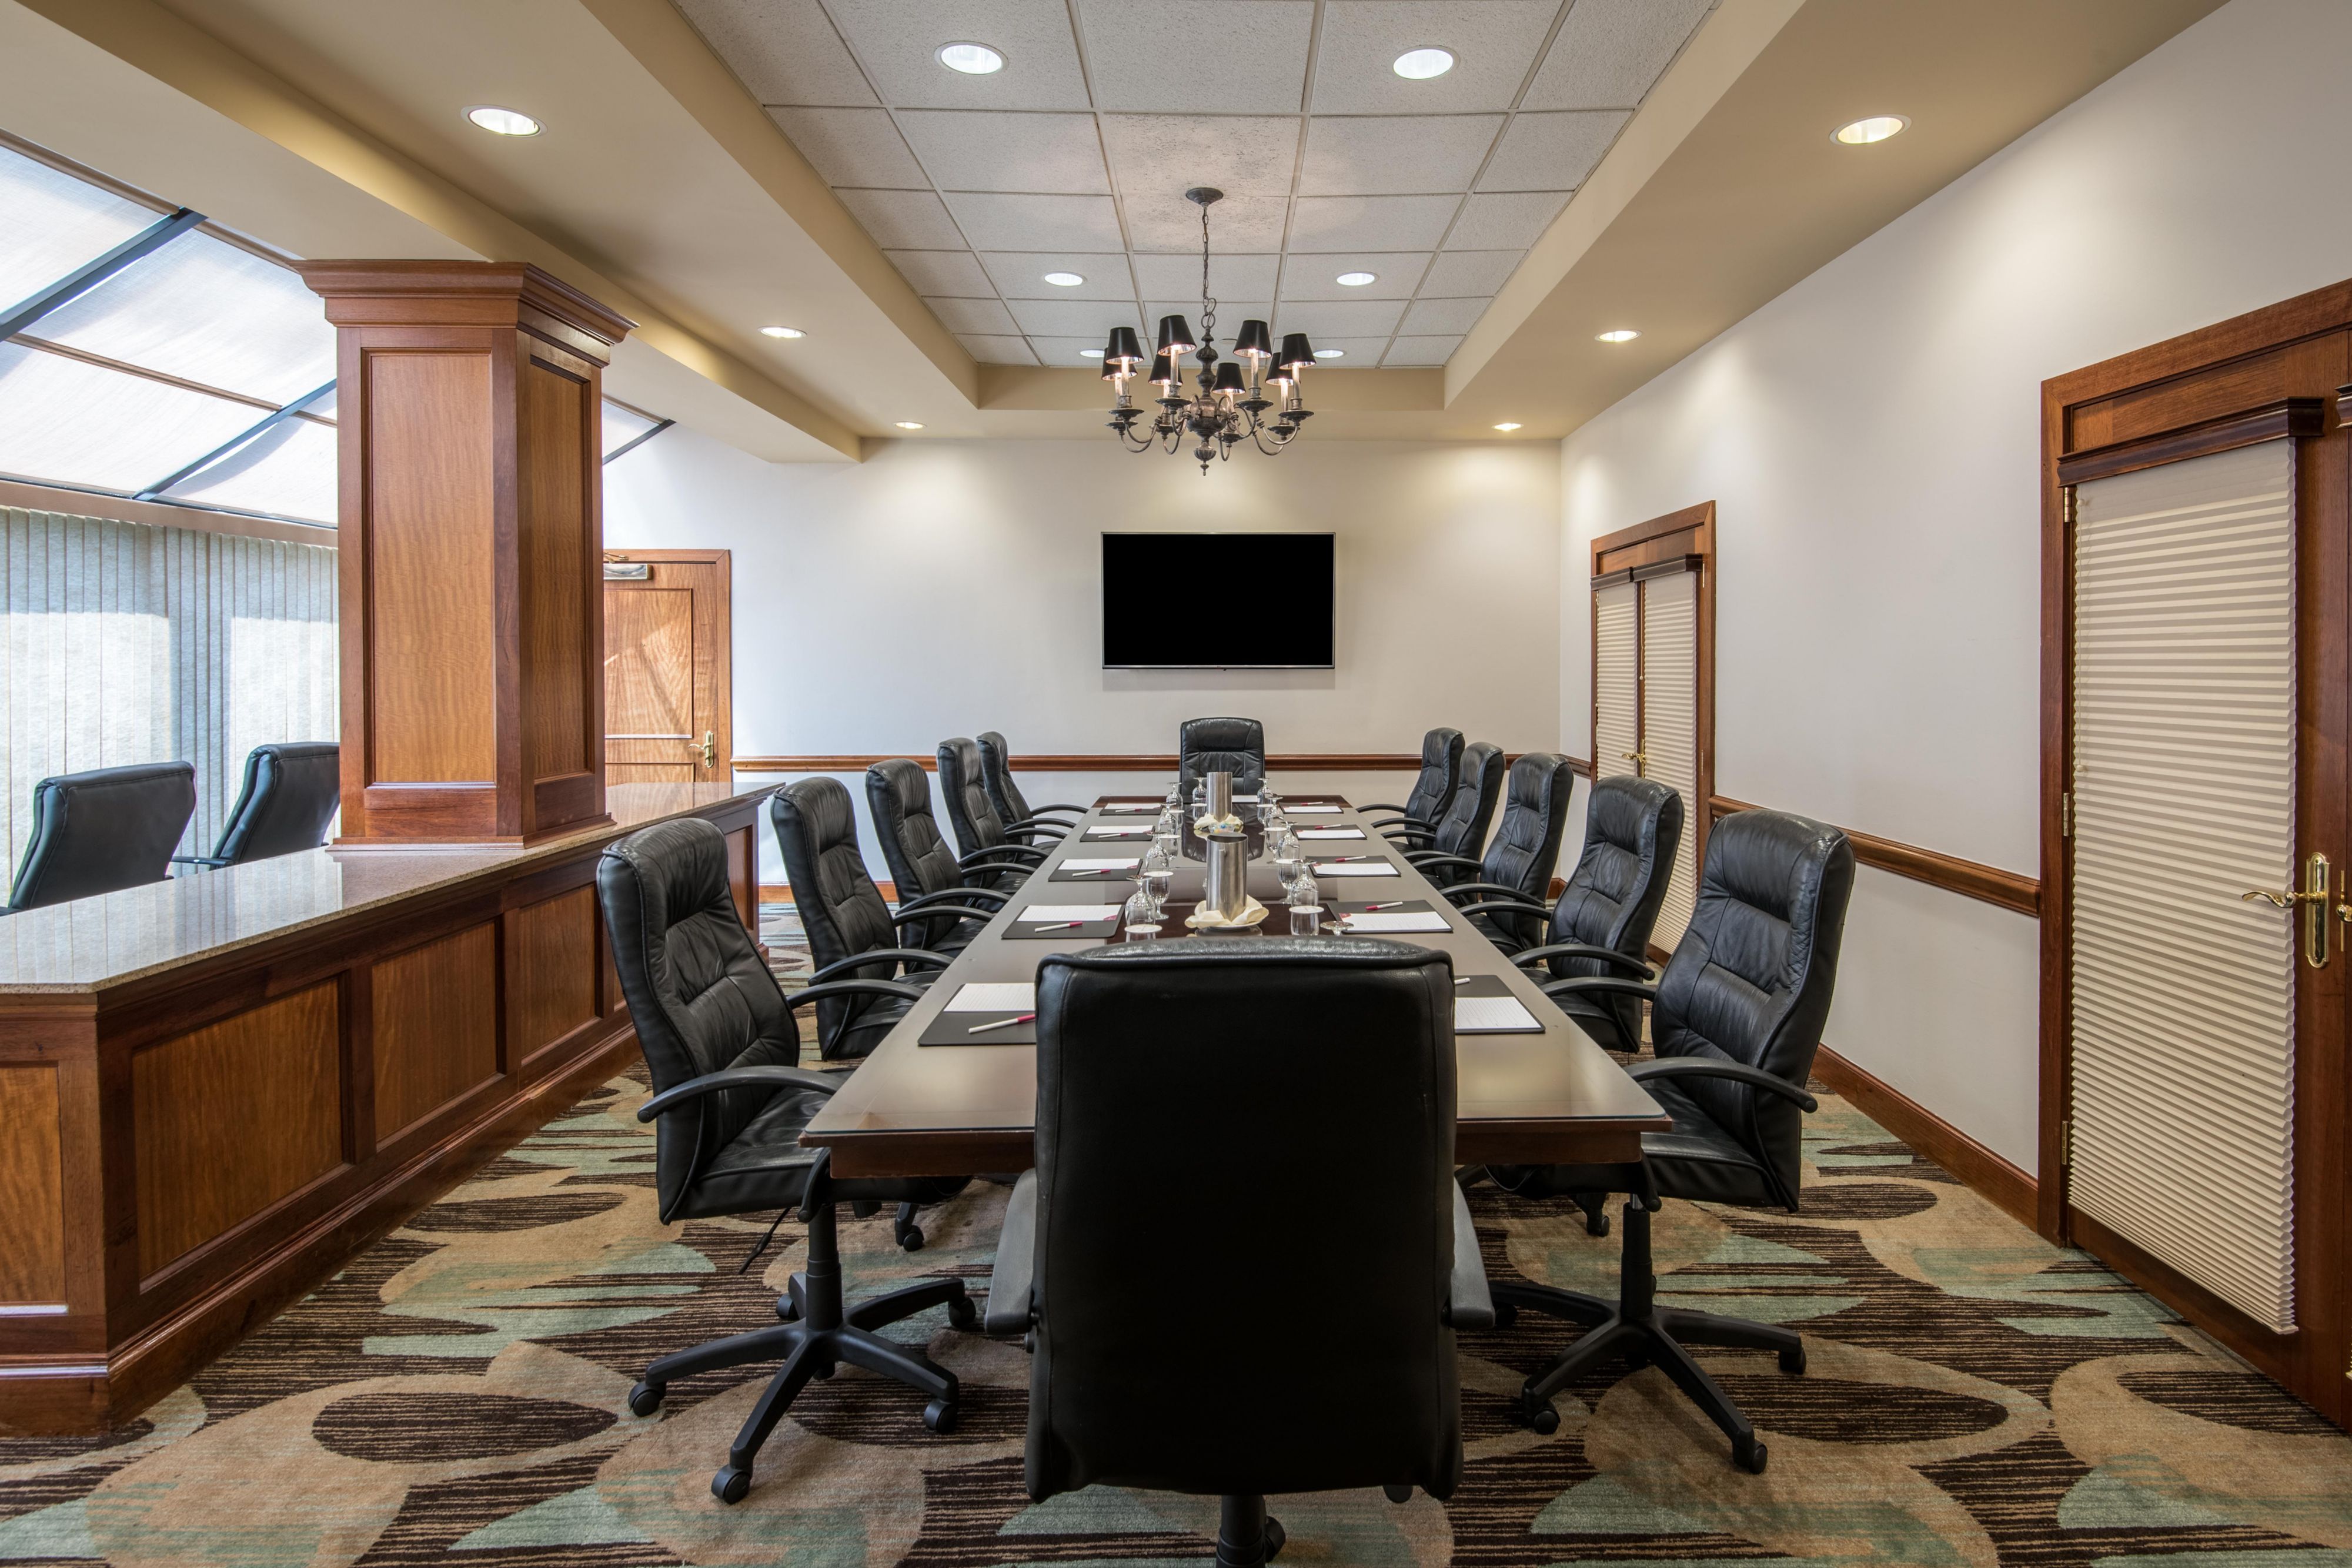 Have a board meeting? Try our Executive Boardroom 1.